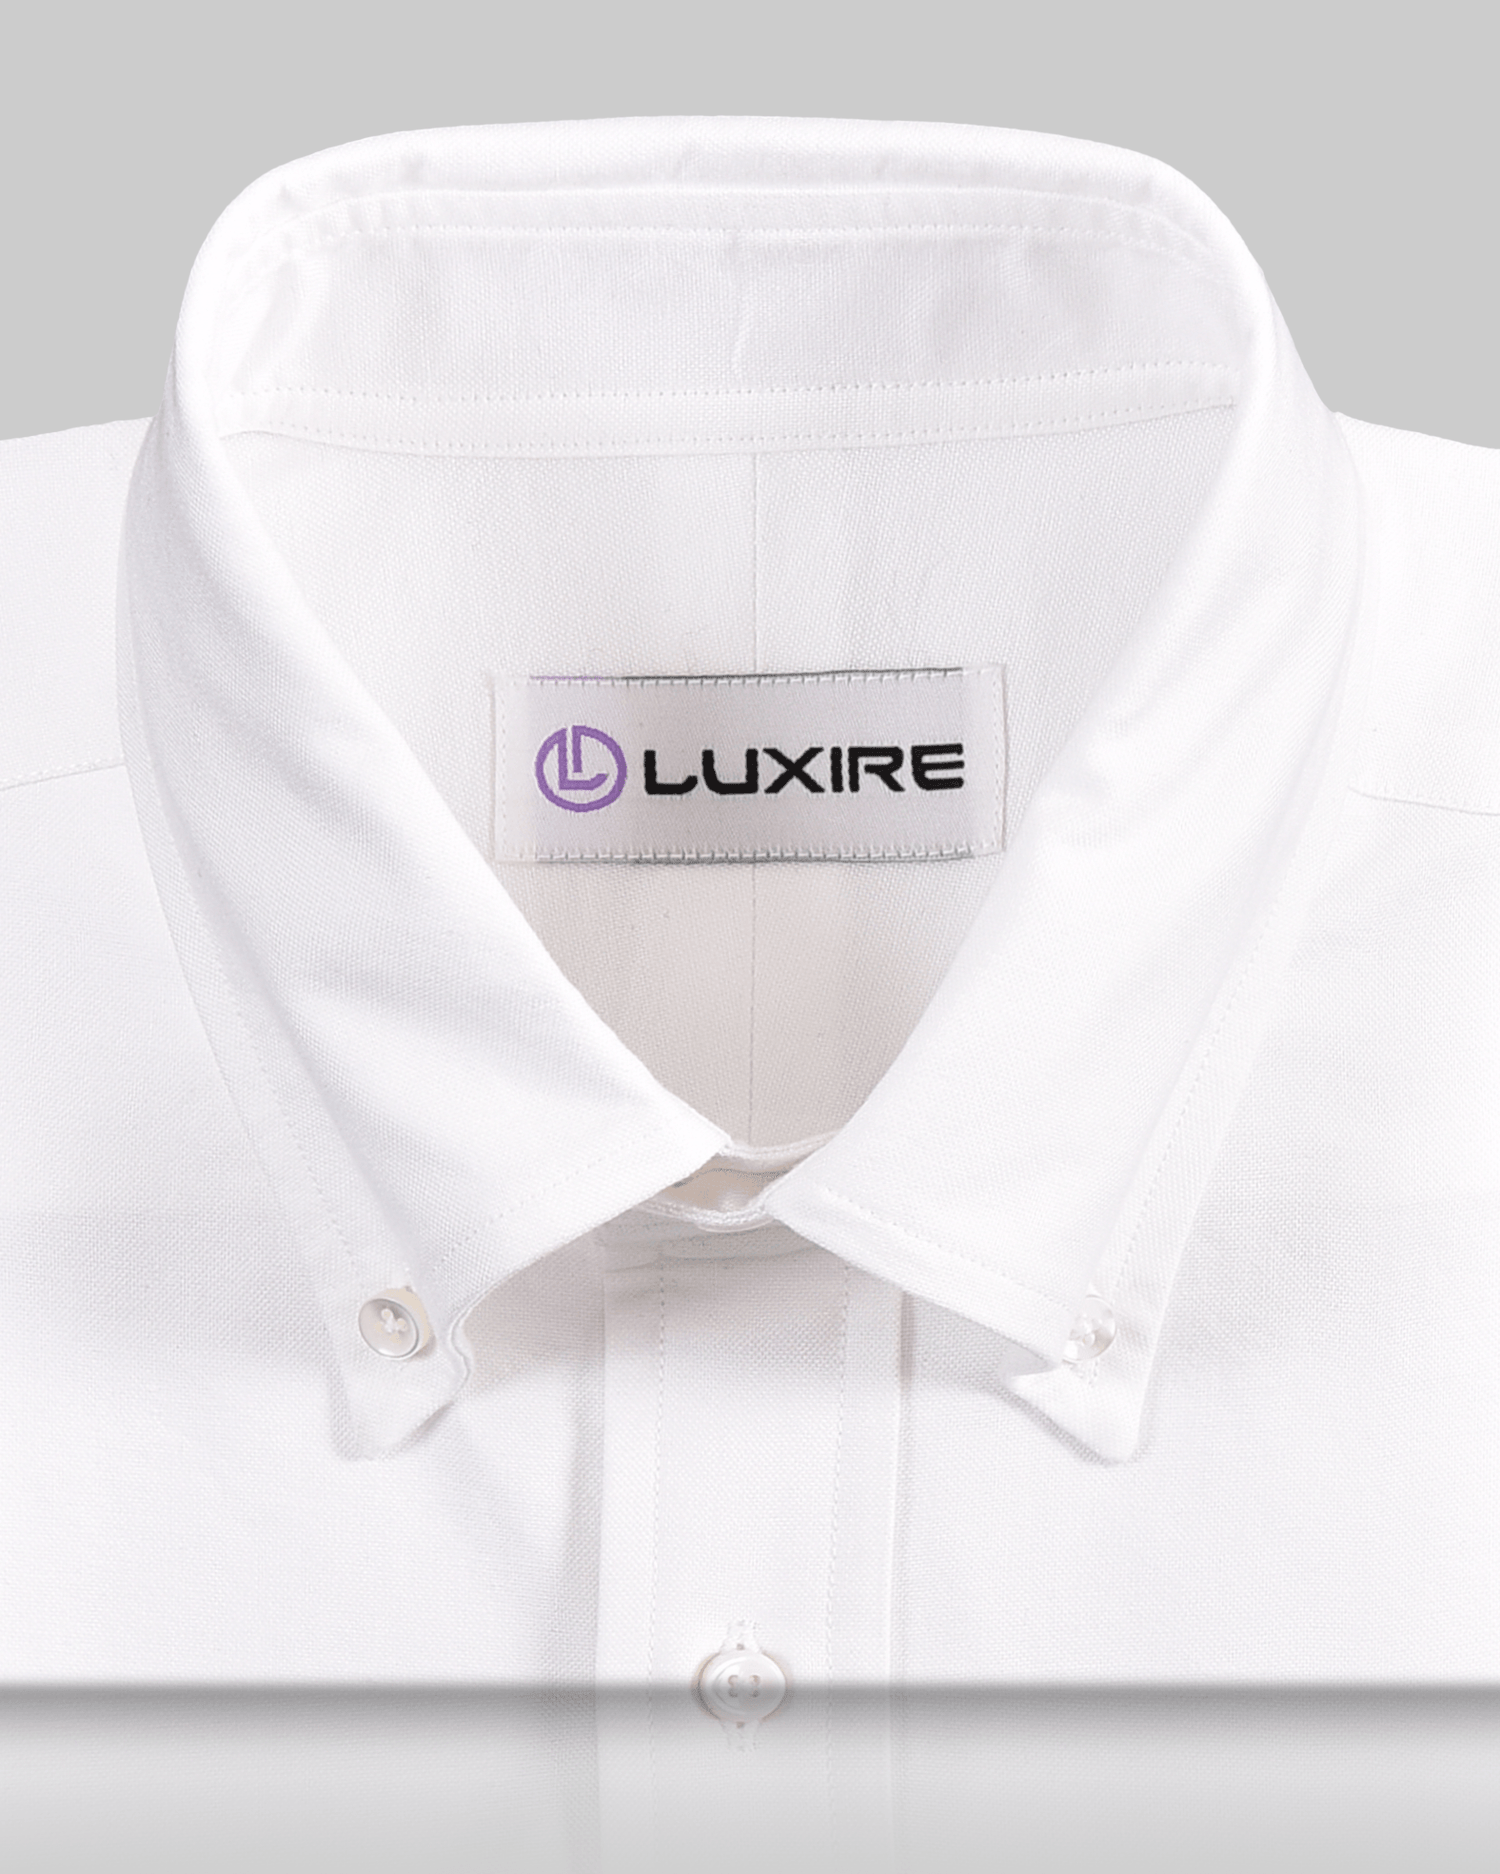 Collar of the custom oxford shirt for men by Luxire in warzone white